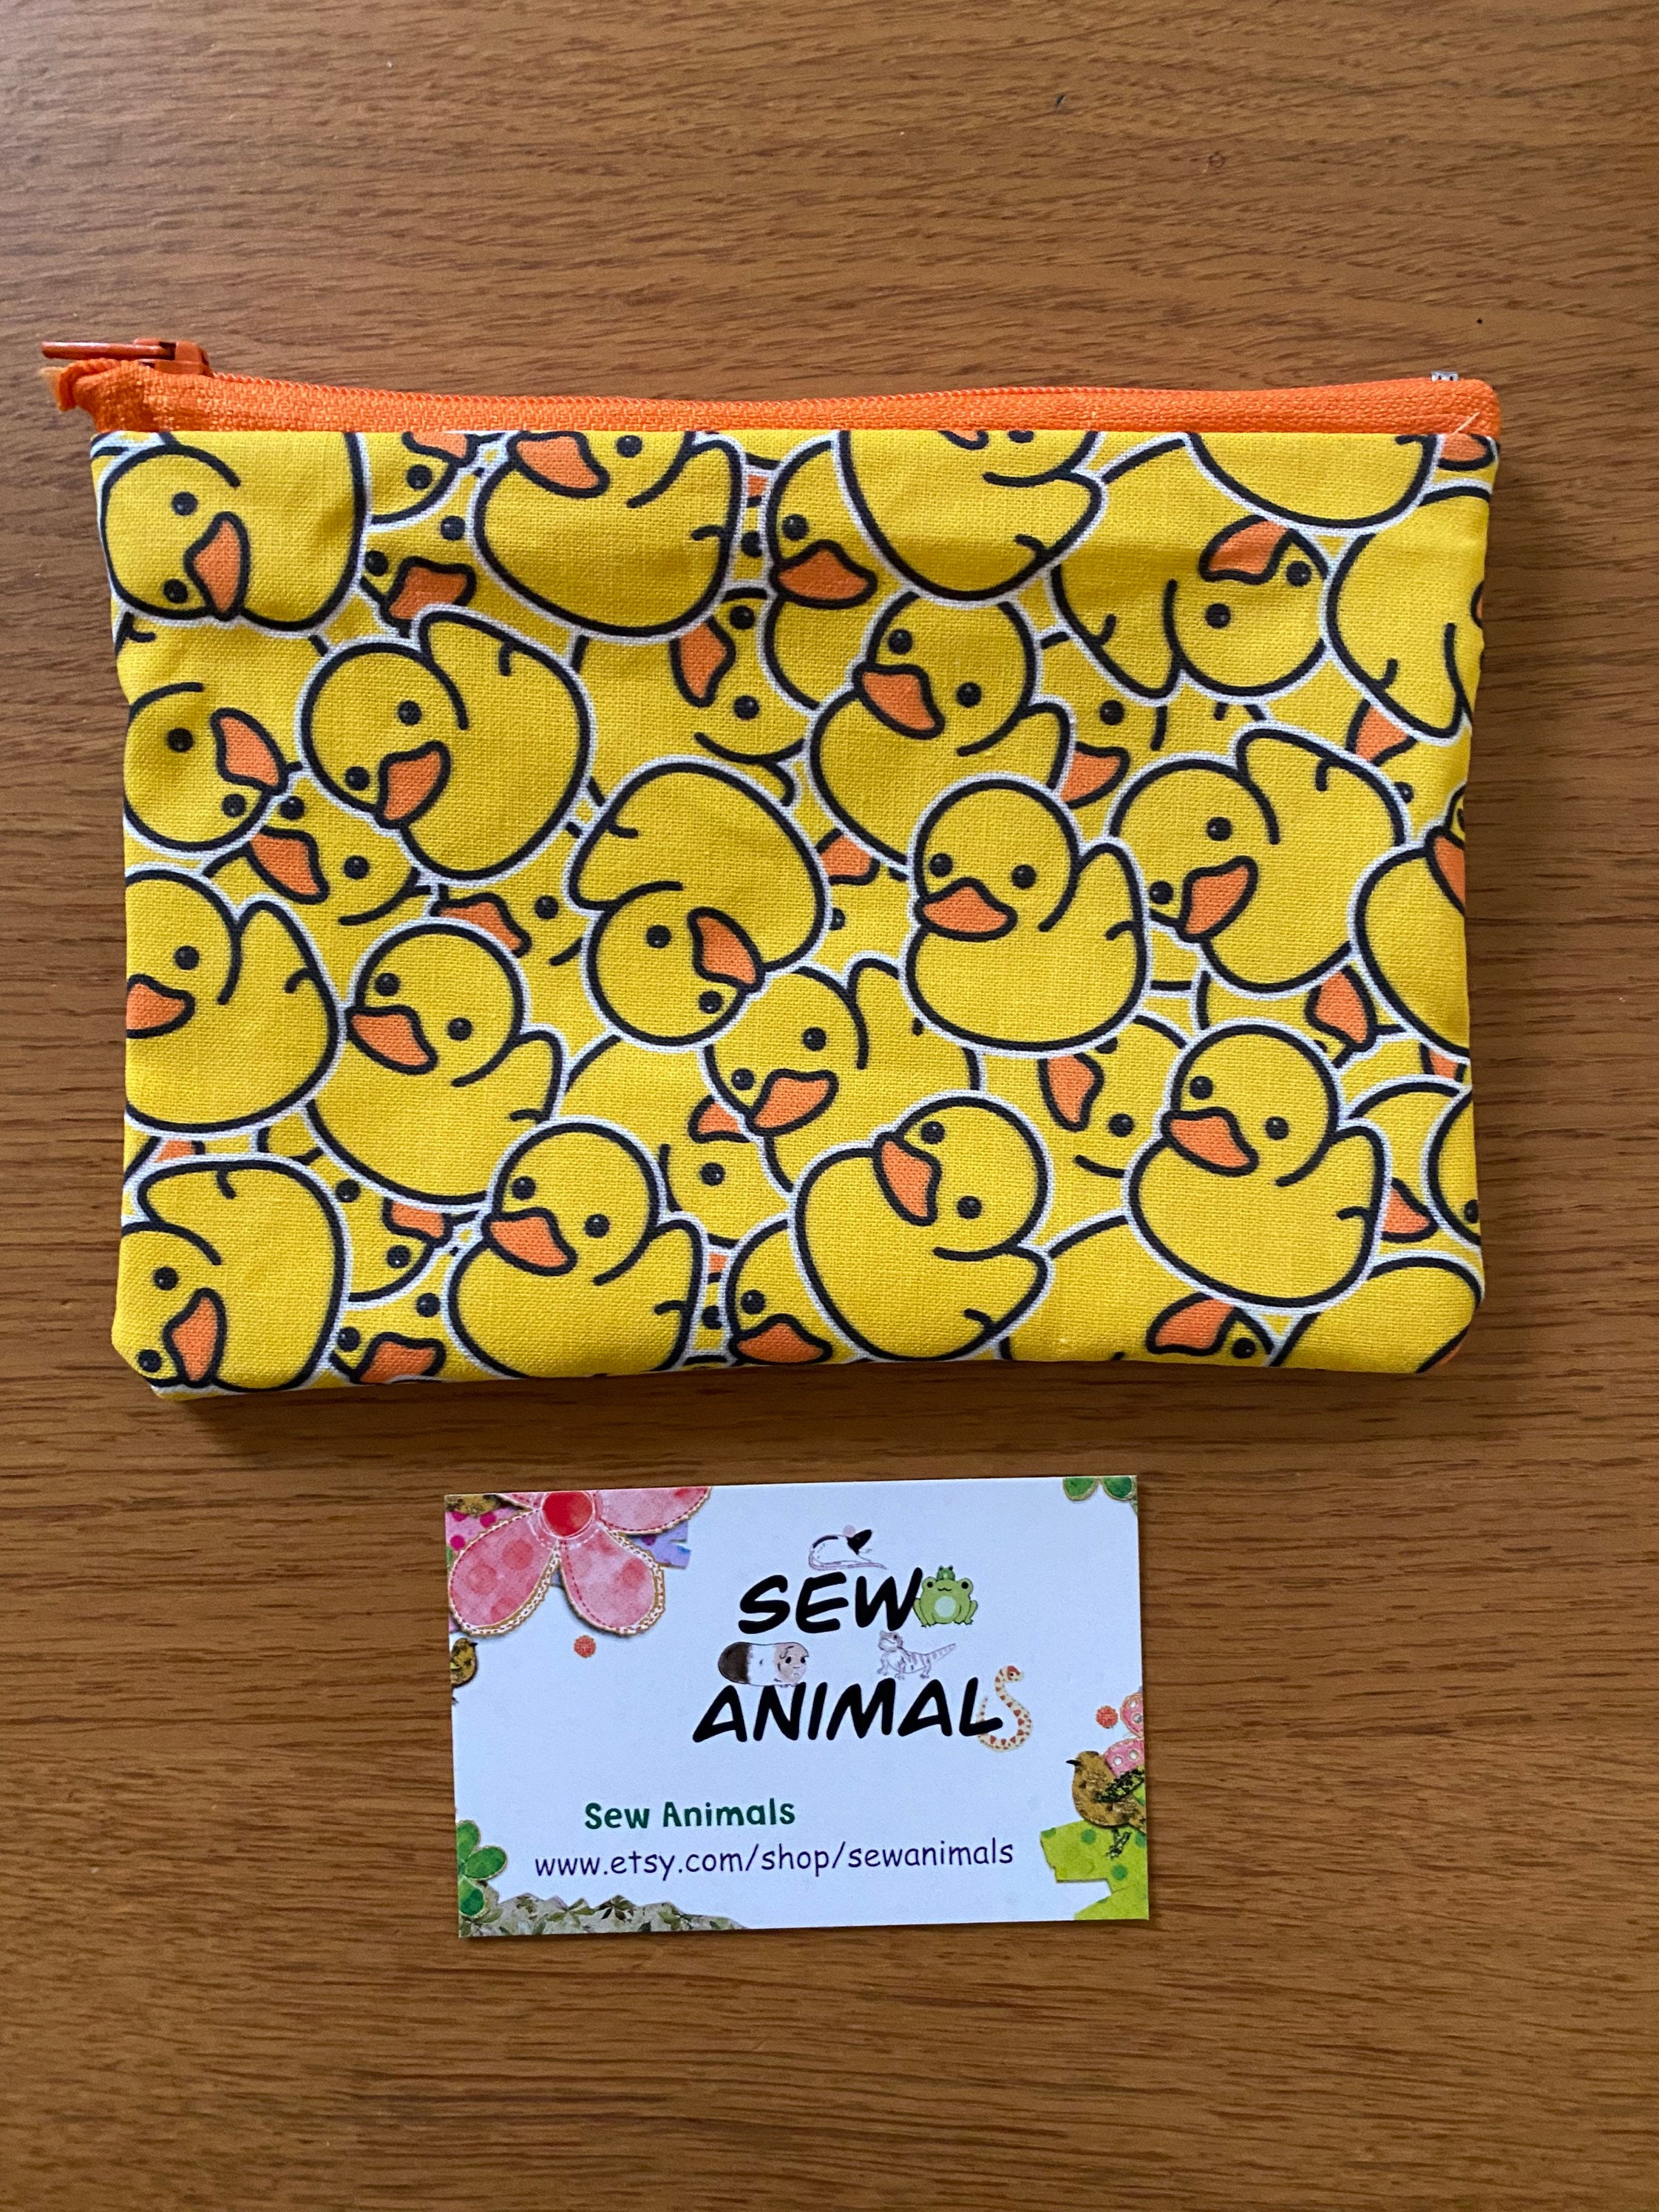 Yellow, silicone duck coin purse with clasp opening • Dimensions